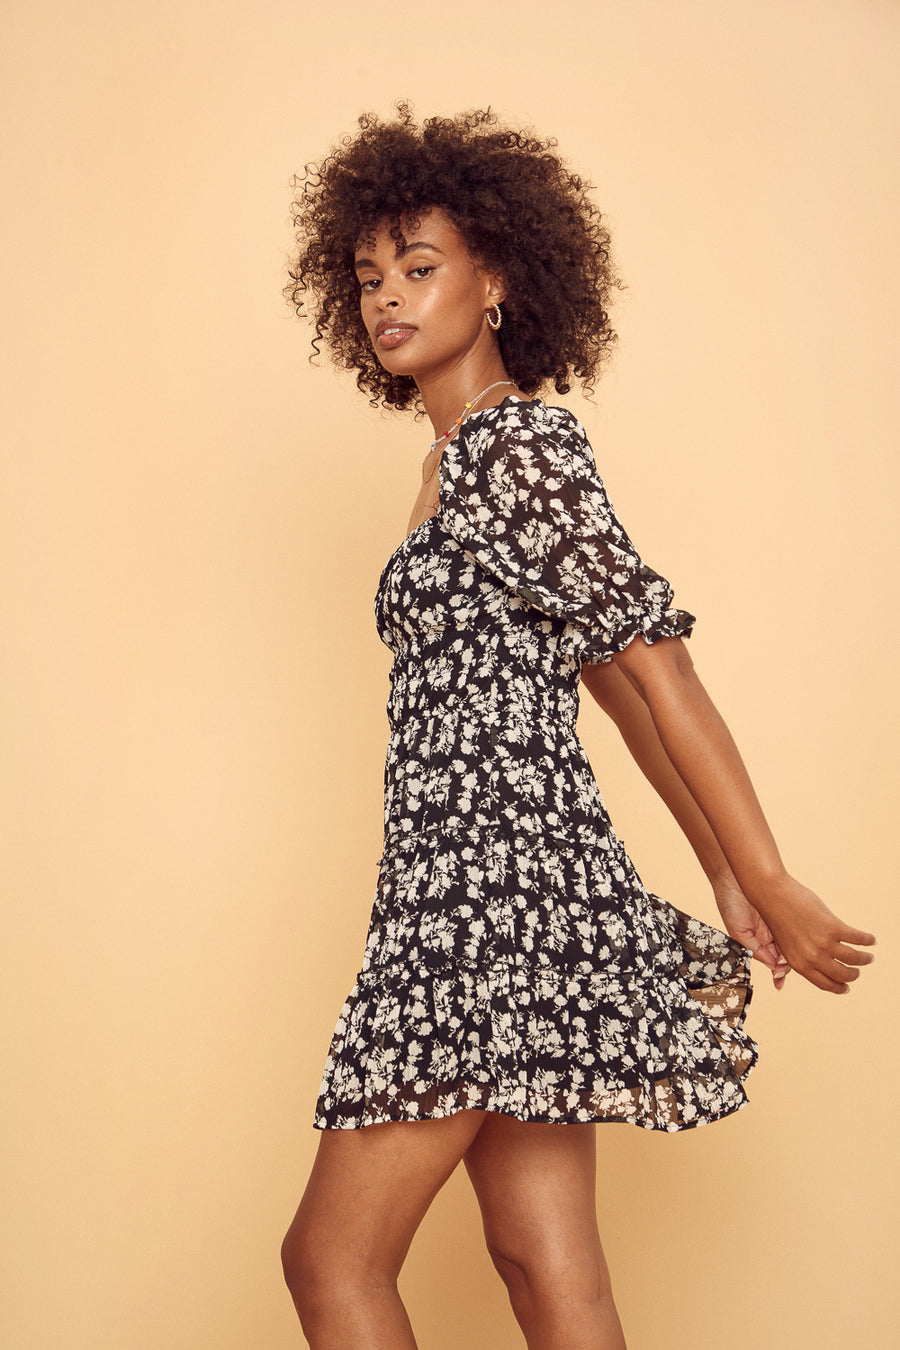 Black and White Floral Dress - Trixxi Clothing